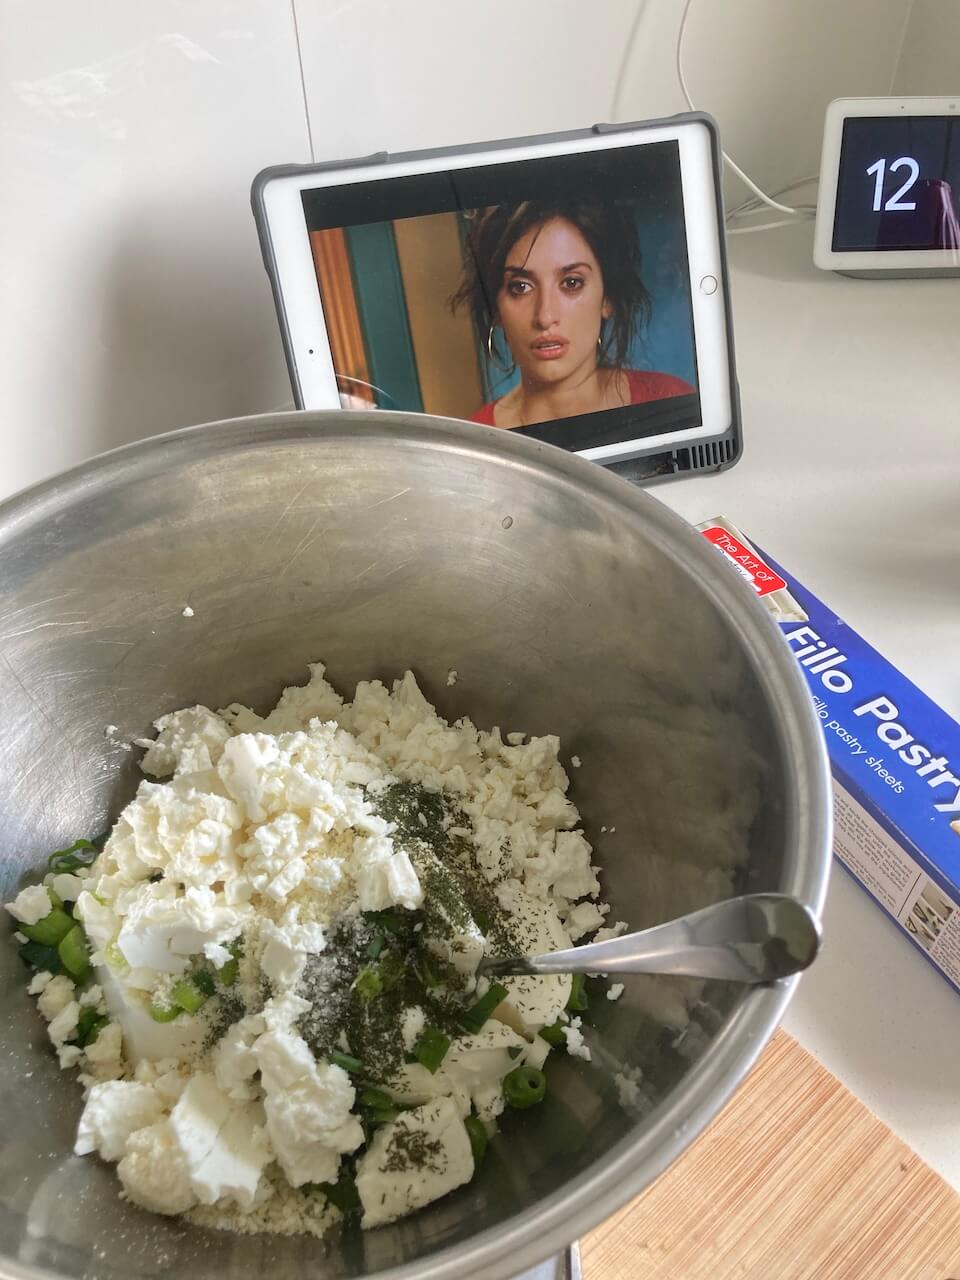 favourite day post watching a movie while cooking